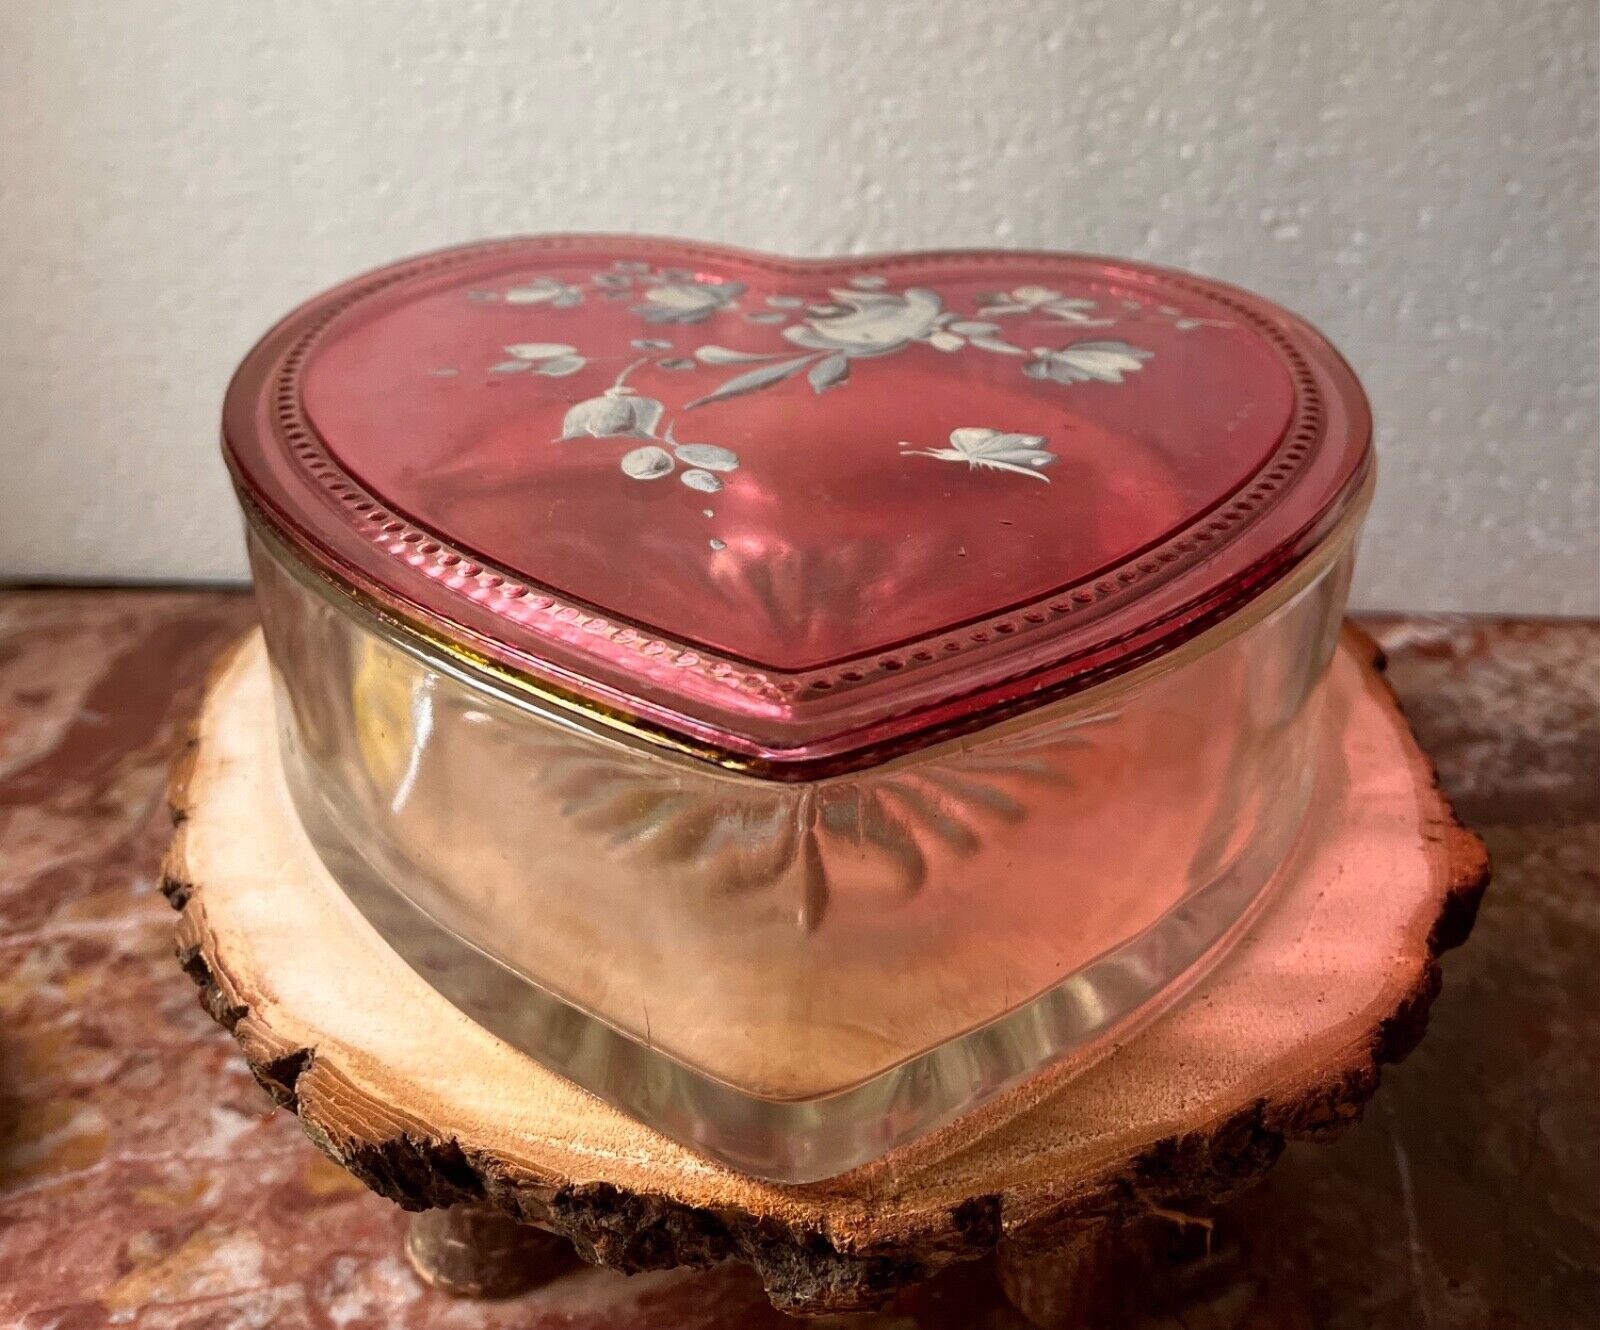 Vintage Heart Shaped Box, Flashed Painted Lid With Hand Painted Floral Design